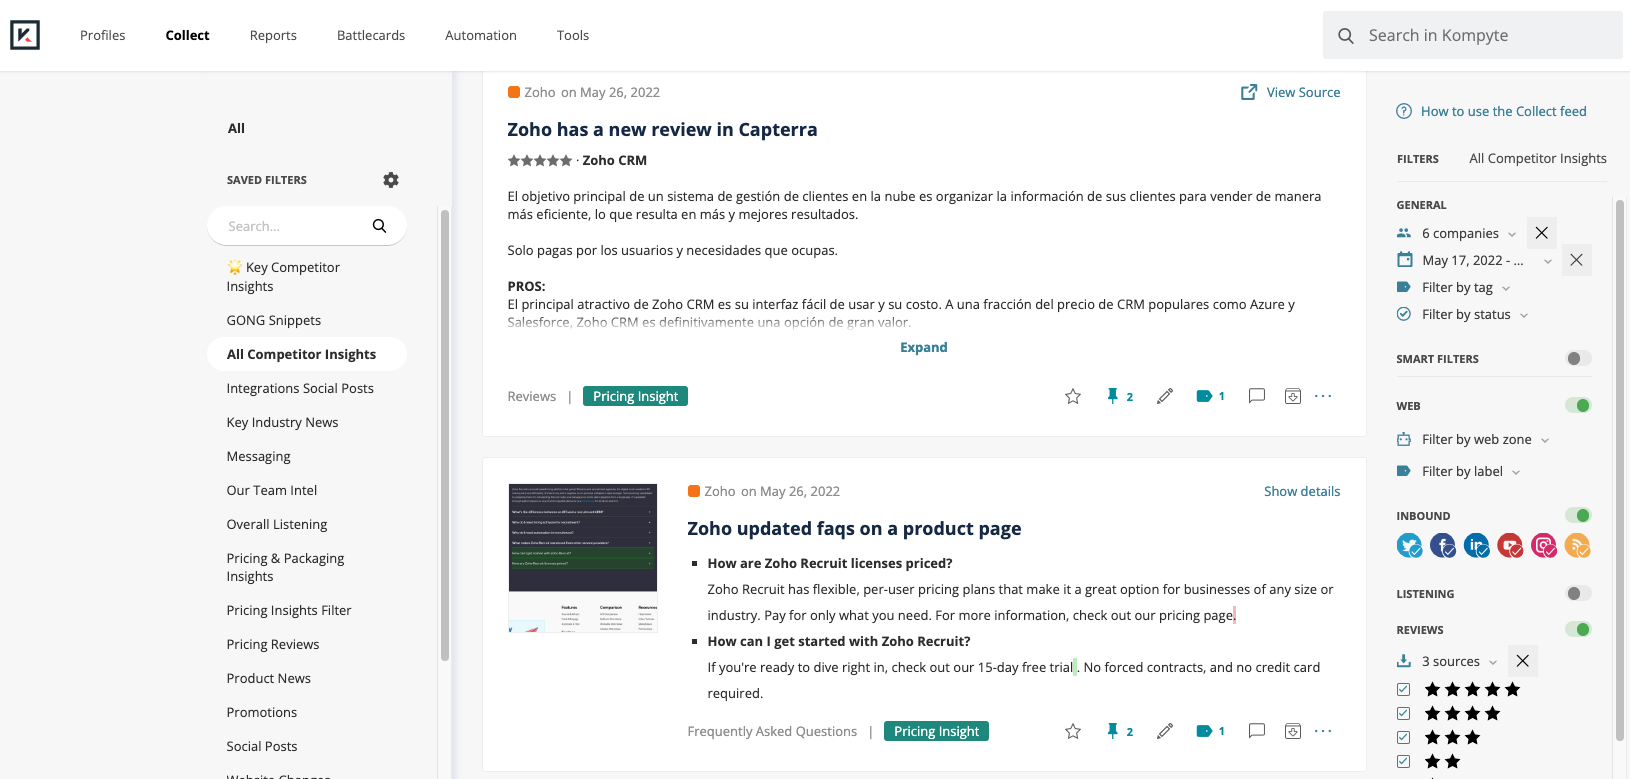 Collect feed in Kompyte showing new review and page update for competitor Zoho